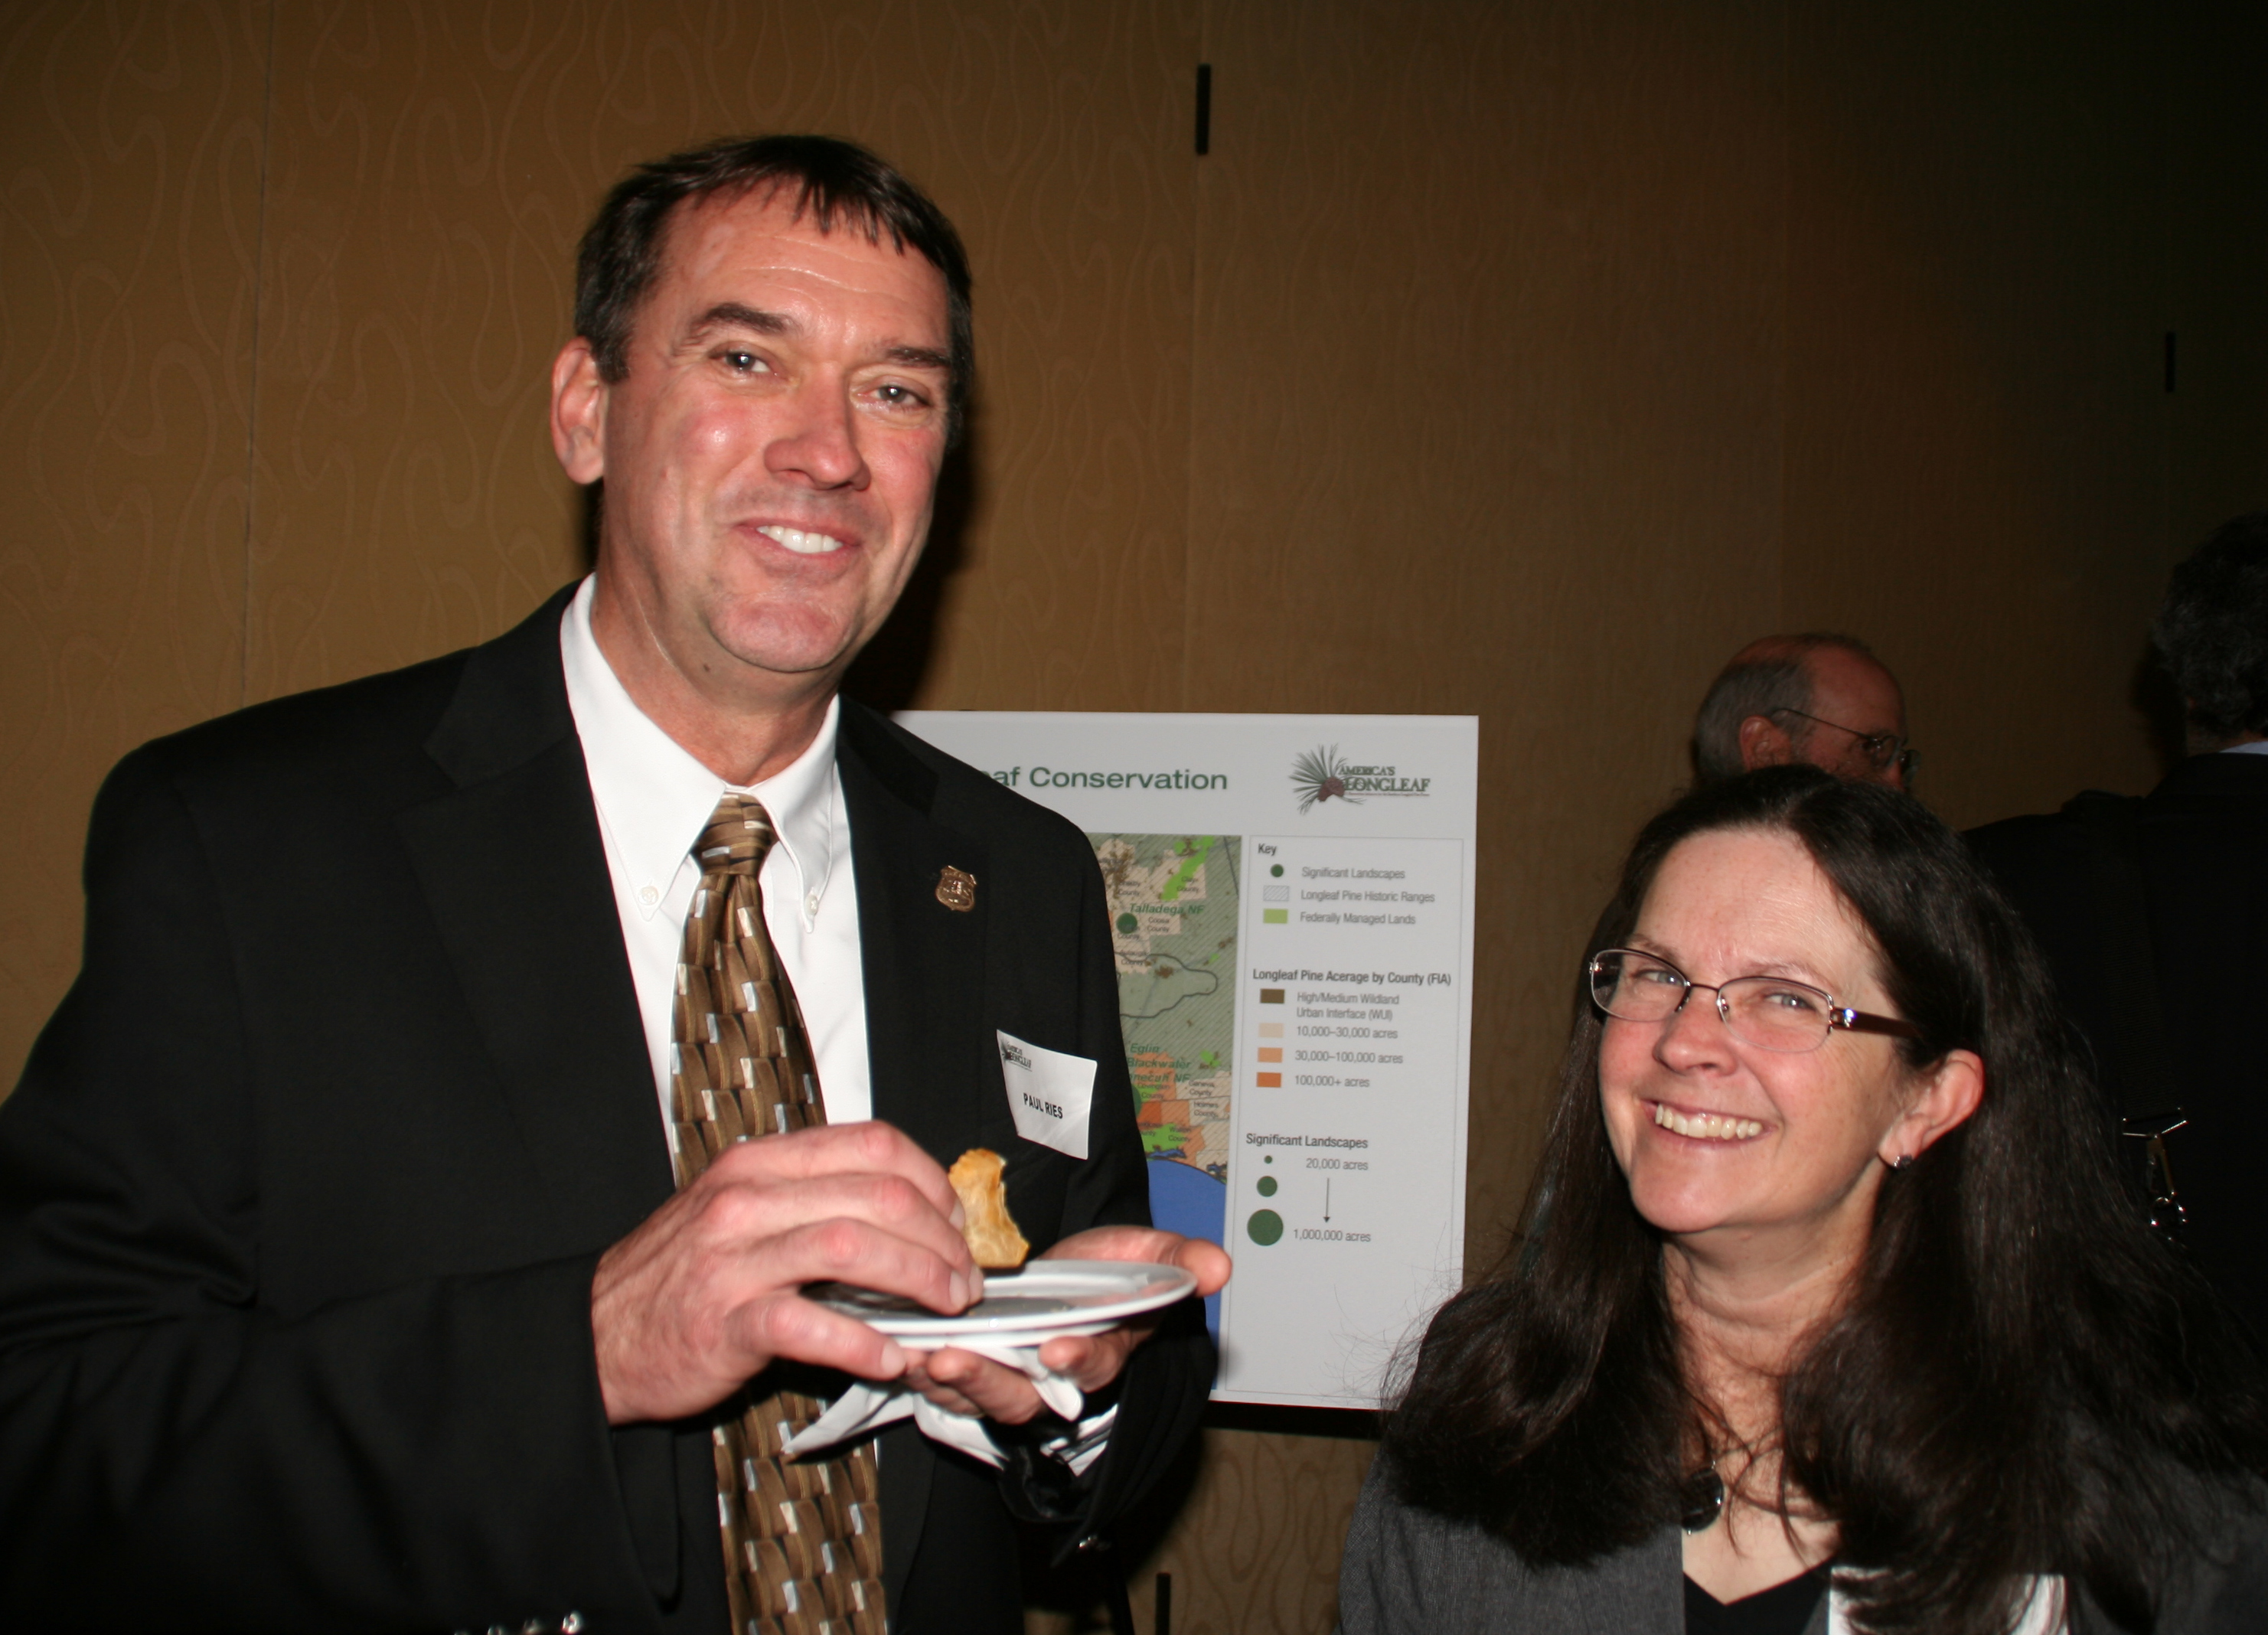 Paul Reis, National Director of the Forest Service’s Cooperative Forestry programs, and his wife enjoy discussions about longleaf